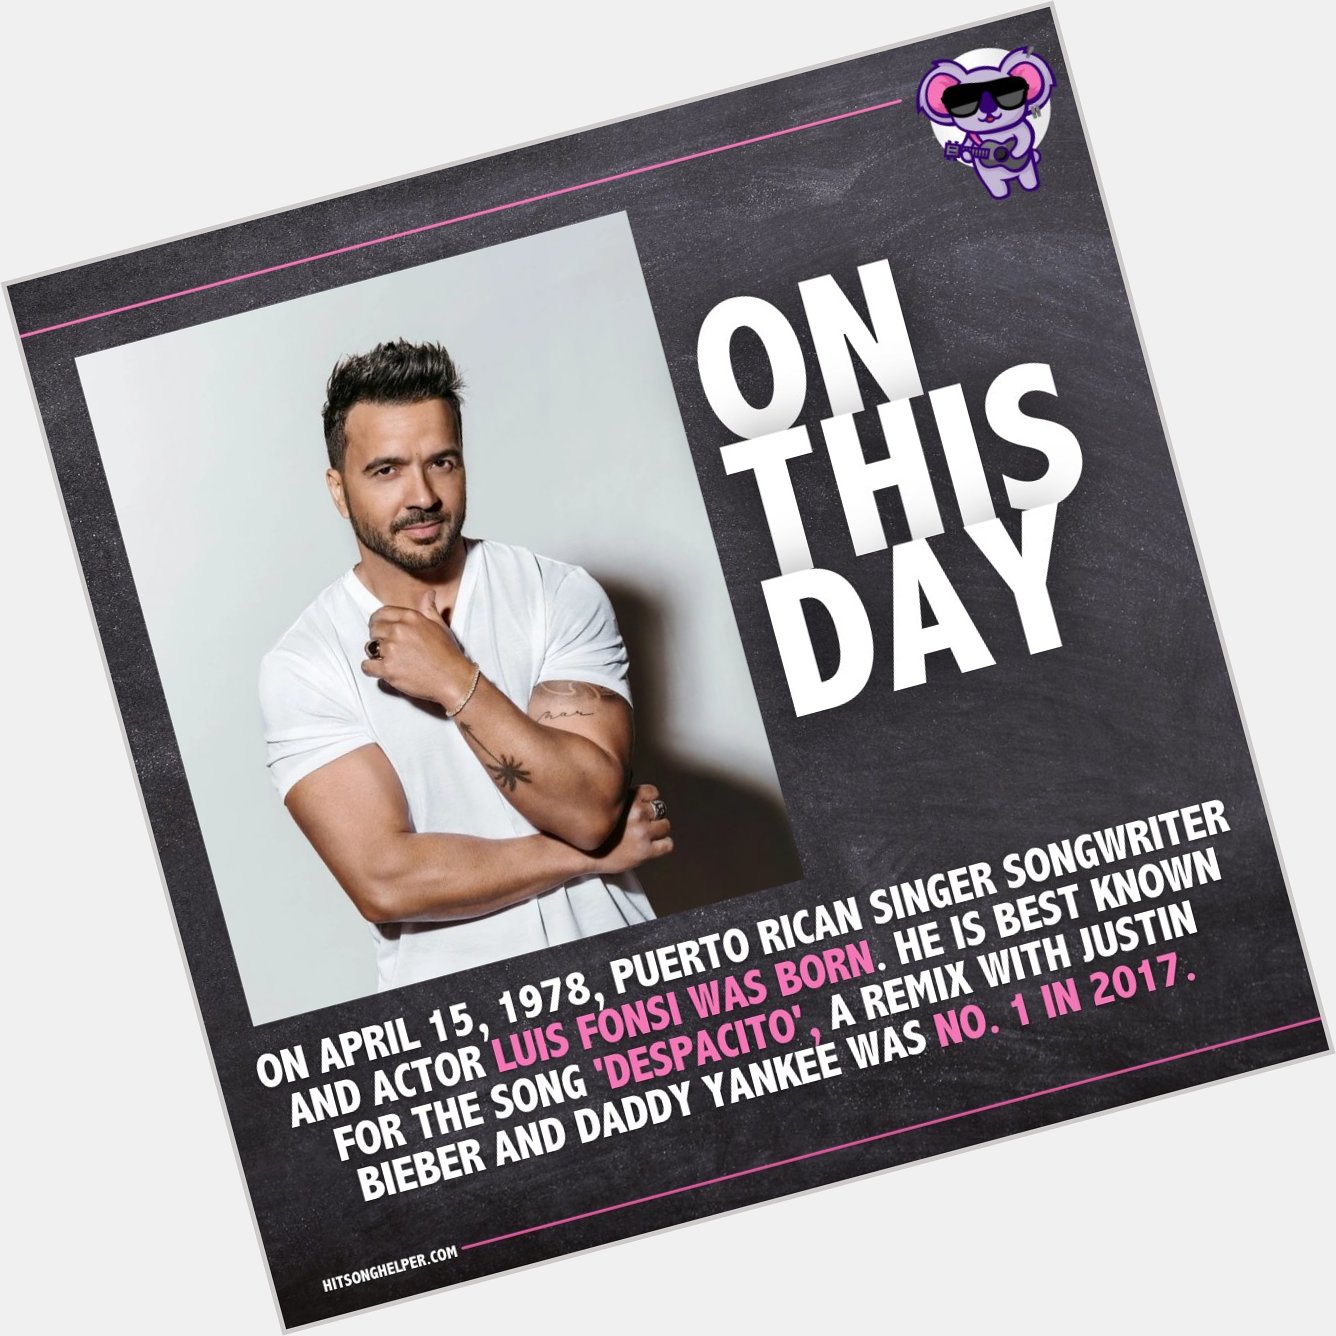  In 1978, Puerto Rican singer songwriter and actor, Luis Fonsi was born! Happy Birthday,  